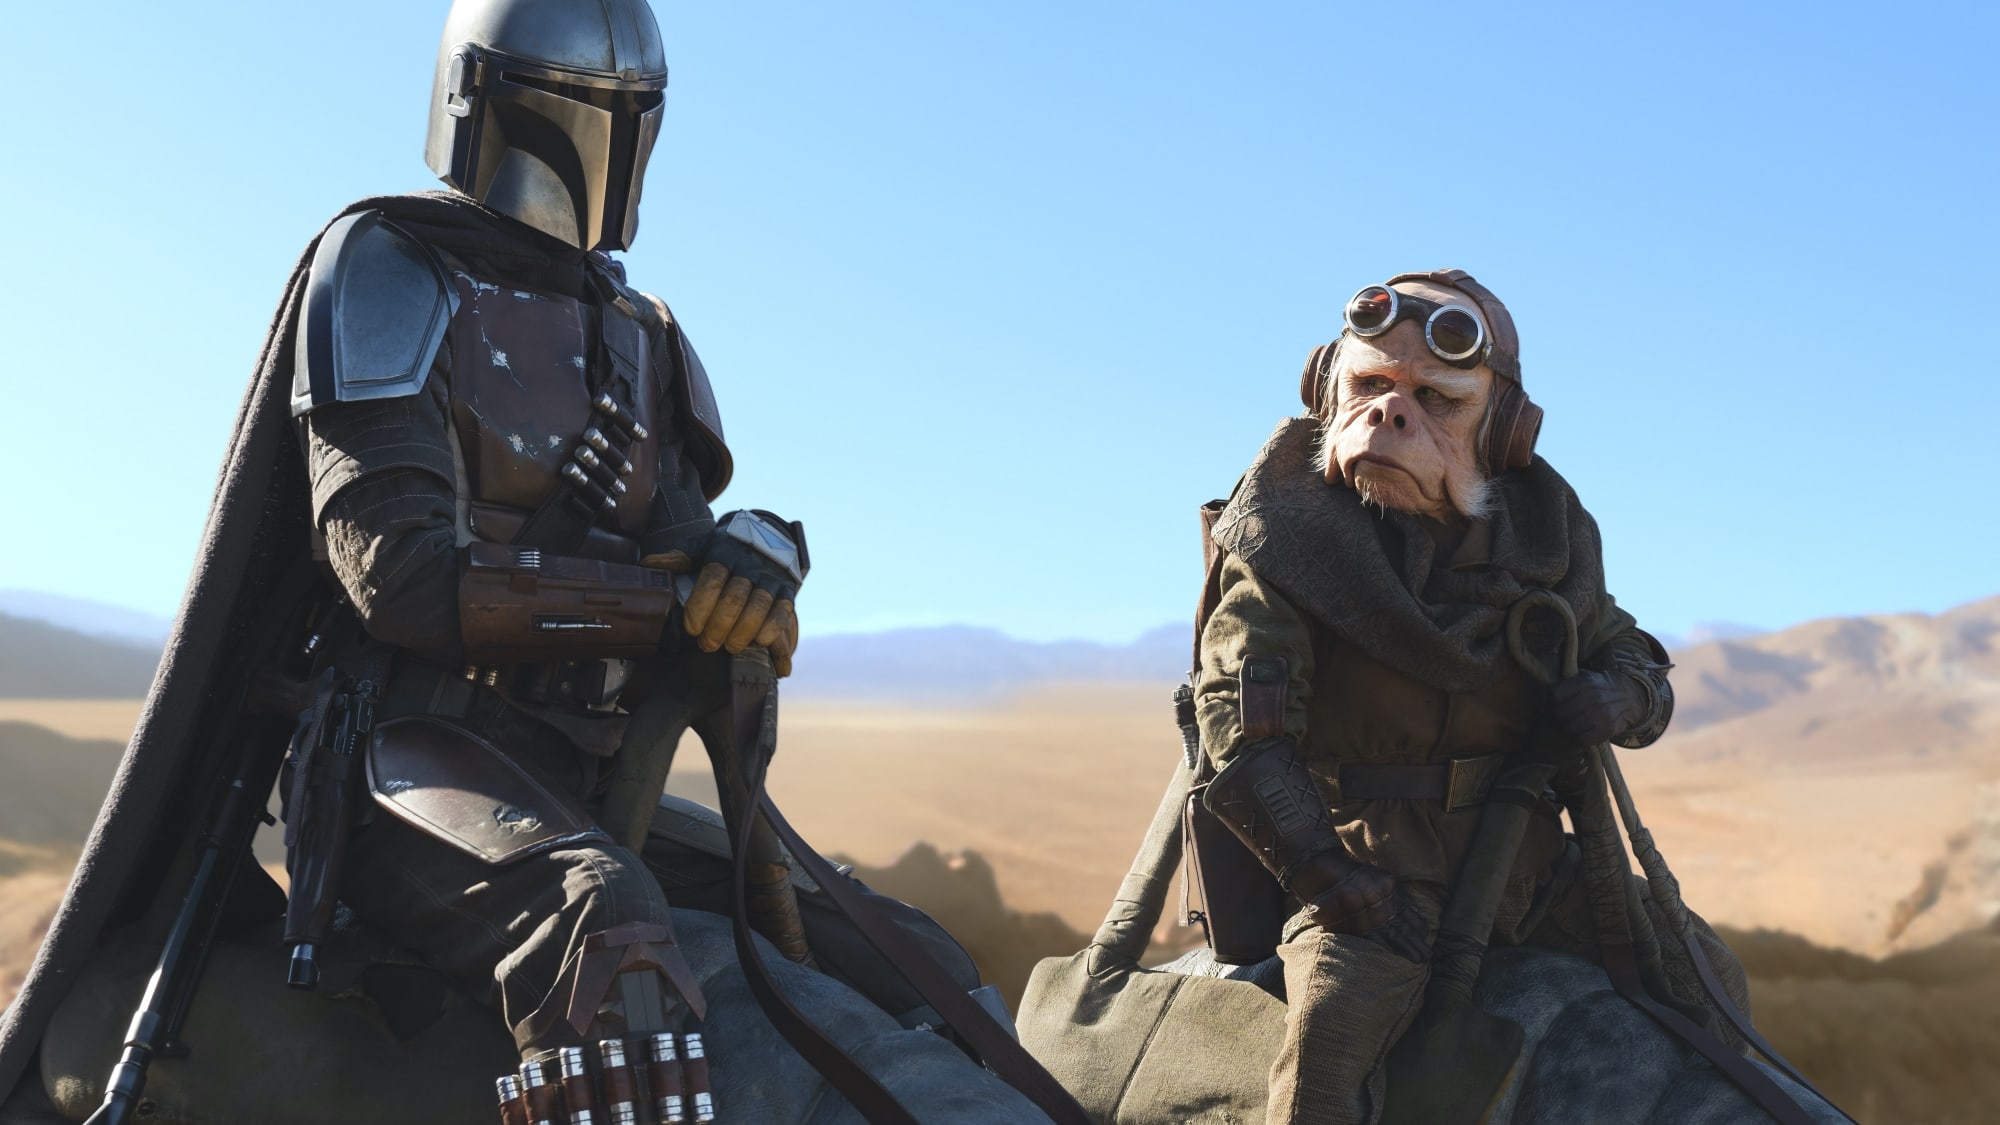 10 little-known facts about the making of The Mandalorian season 1